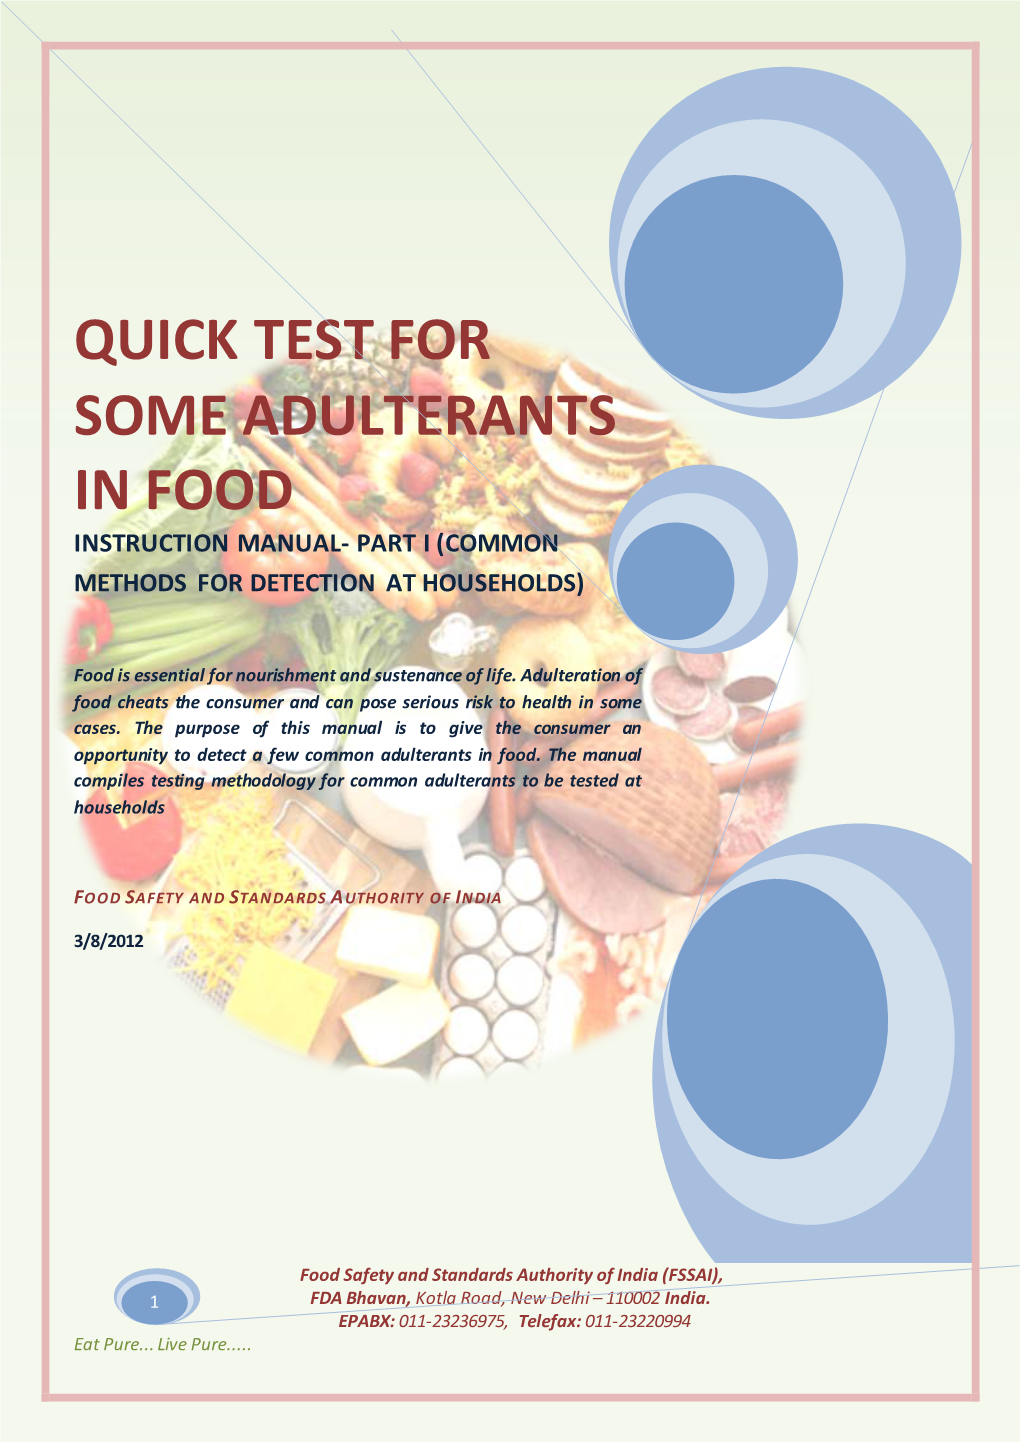 Quick Test for Some Adulterants in Food